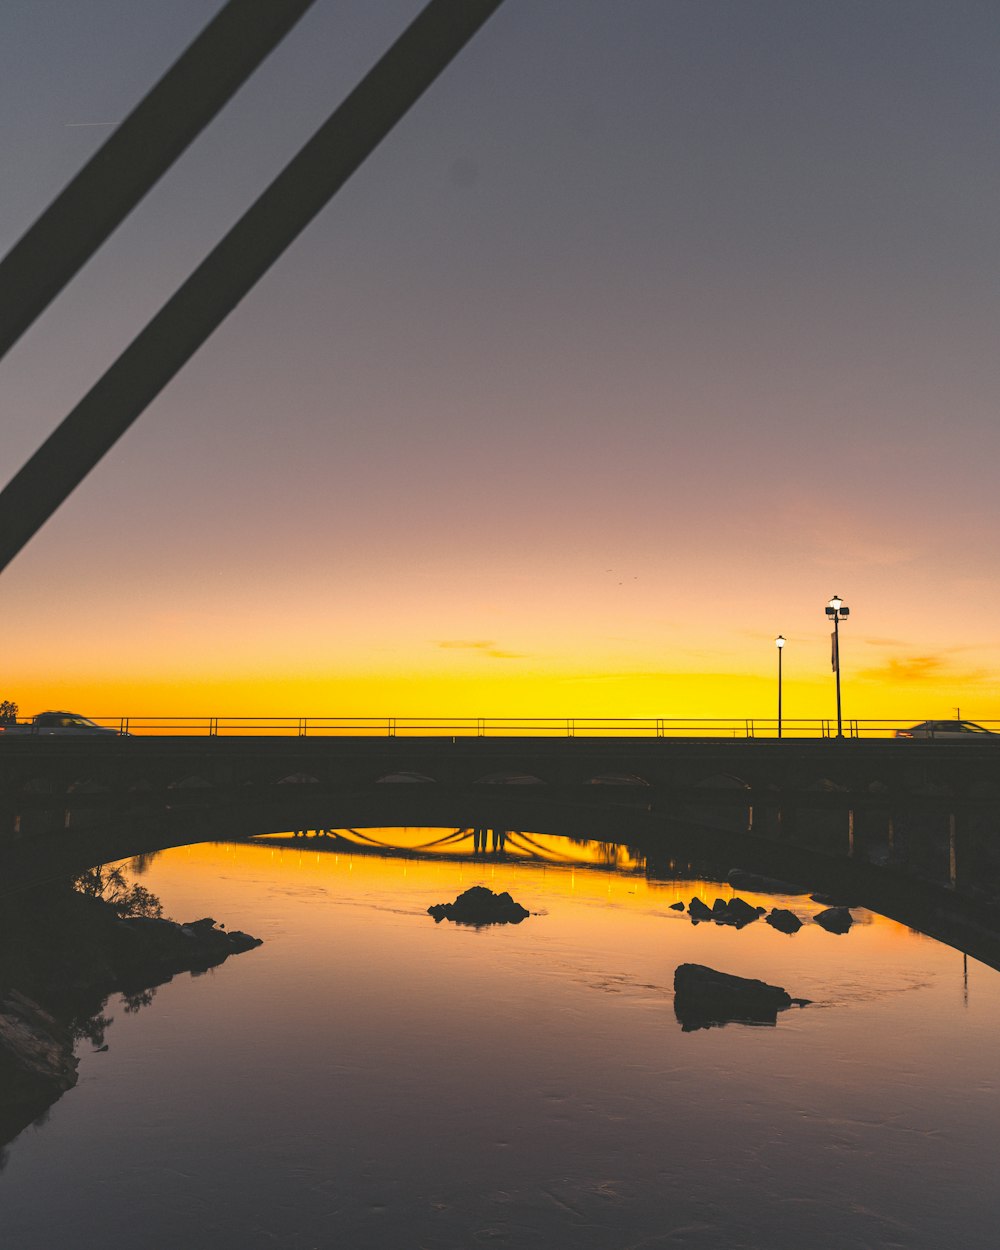 silhouette of bridge over river at sunset